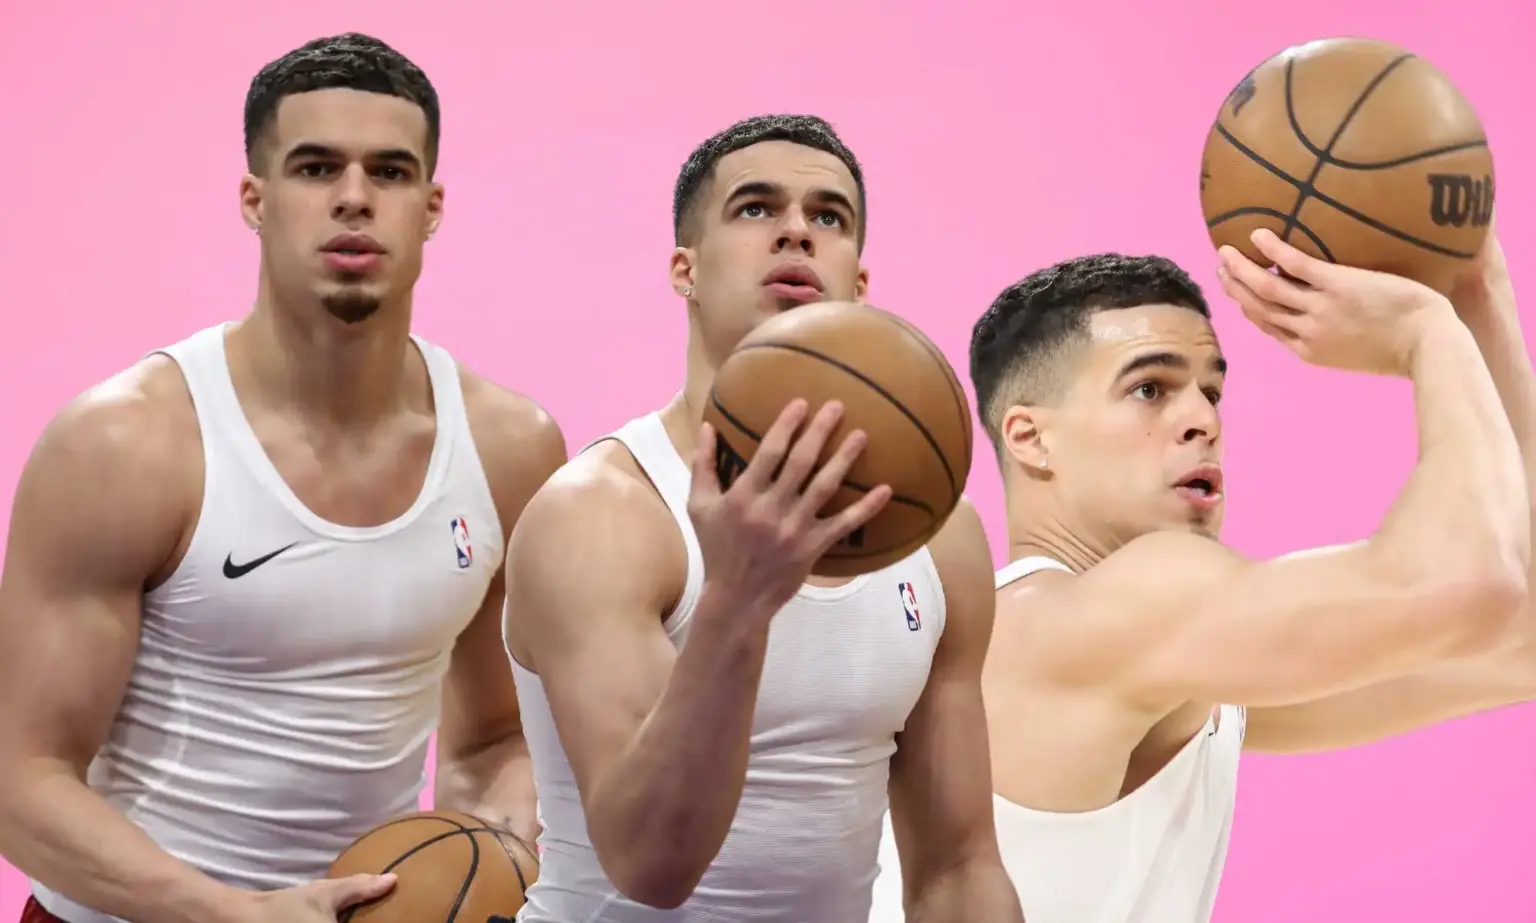 NBA star claims other players are having sex with men and trans women: ‘Porn has a part to play’